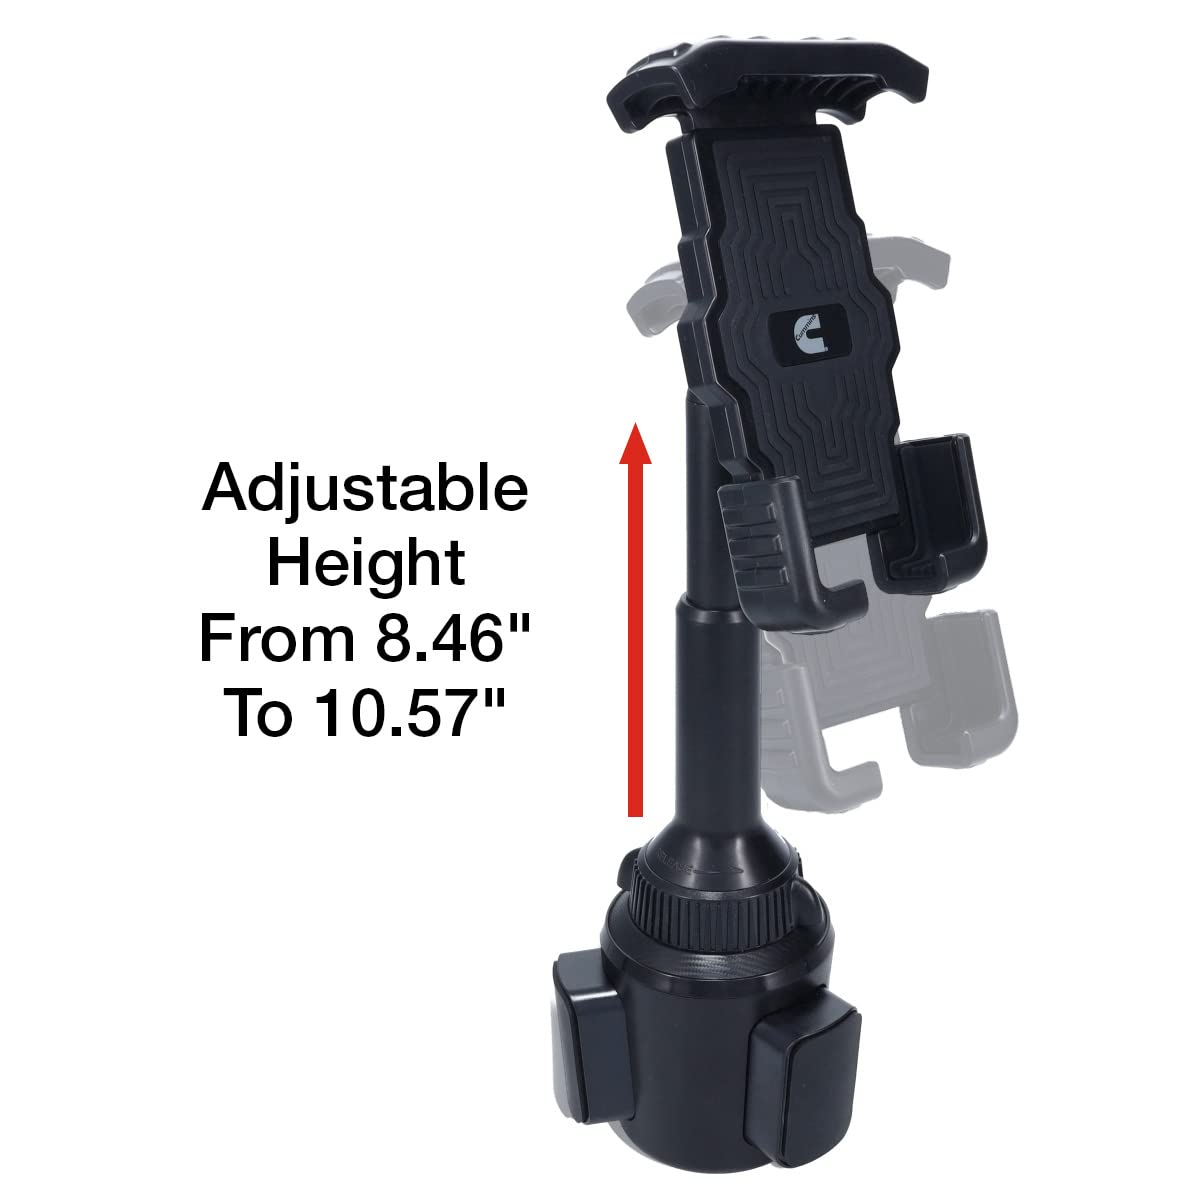 Cummins Cup Phone Holder for Car or Truck CMNCHPH - Adjustable Phone Mount for Cell Phone Car Phone Holder - Black